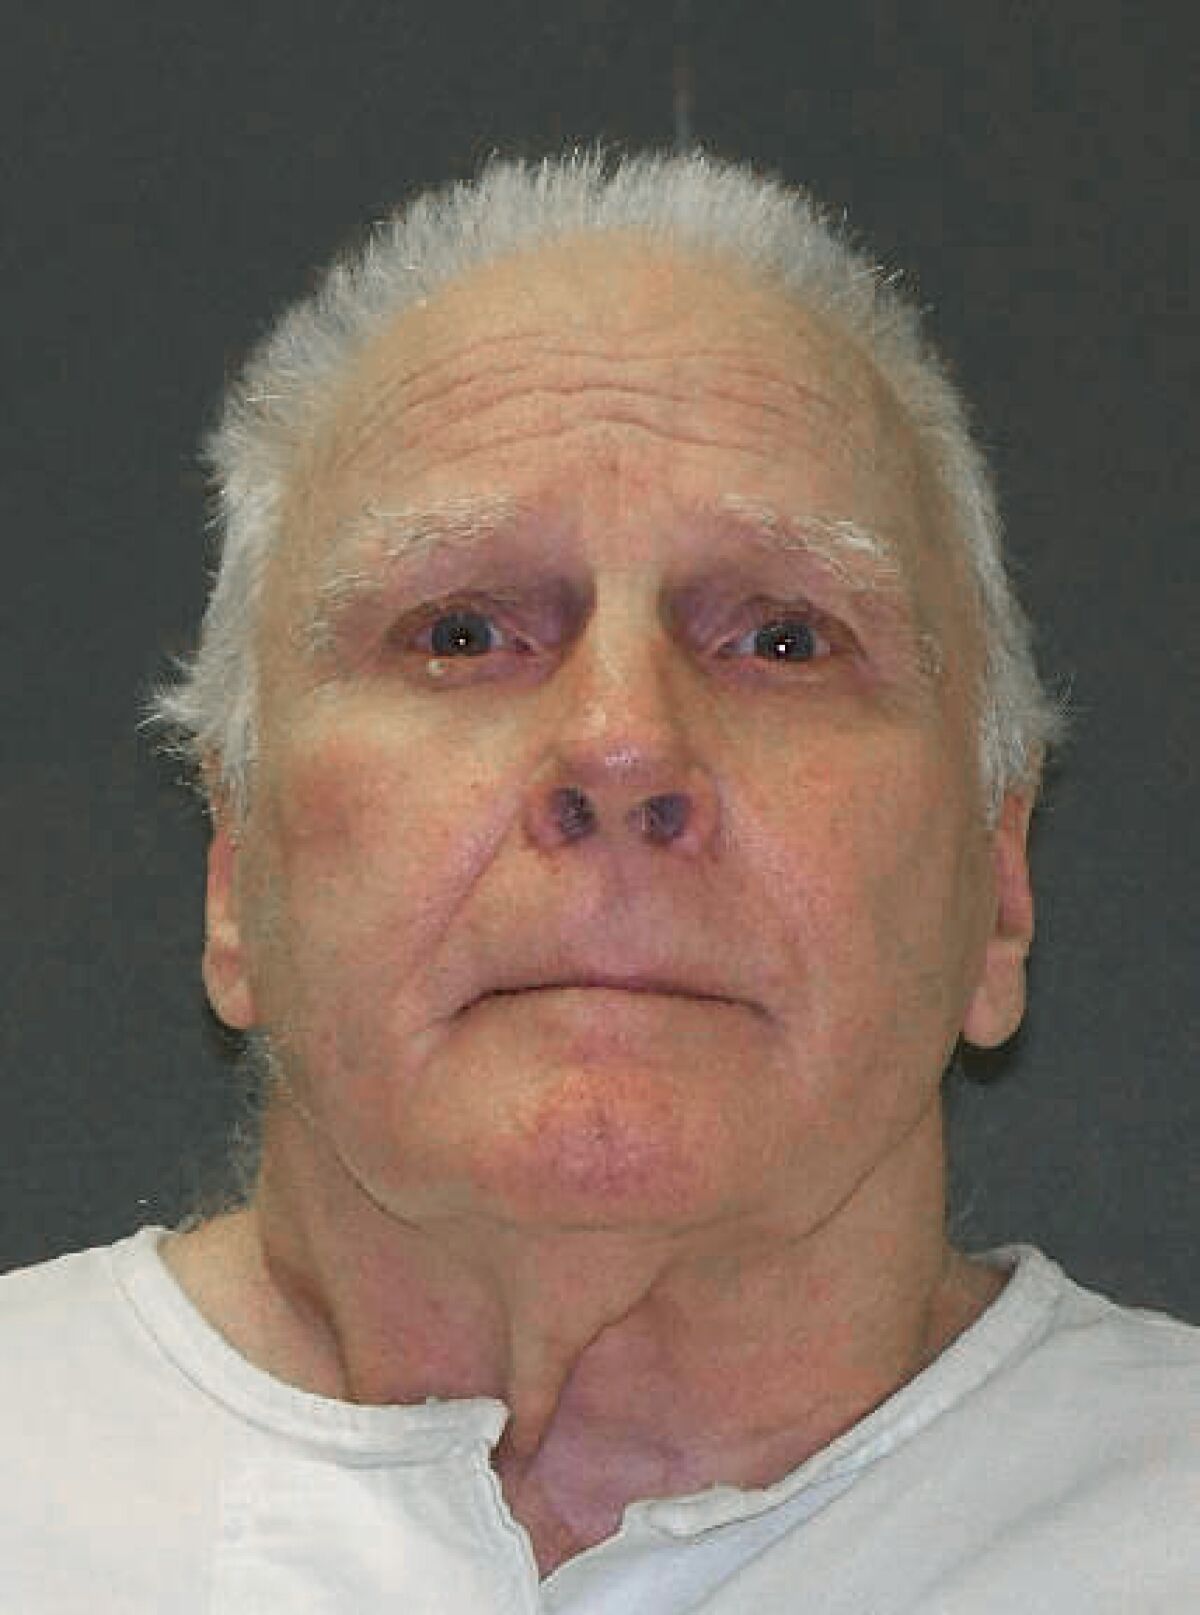 In this undated photo provided by the Texas Department of Criminal Justice, shows death row inmate Carl Wayne Buntion. Buntion, Texas' oldest death row inmate, faces execution for killing a Houston police officer nearly 32 years ago during a traffic stop. (Texas Department of Criminal Justice via AP)